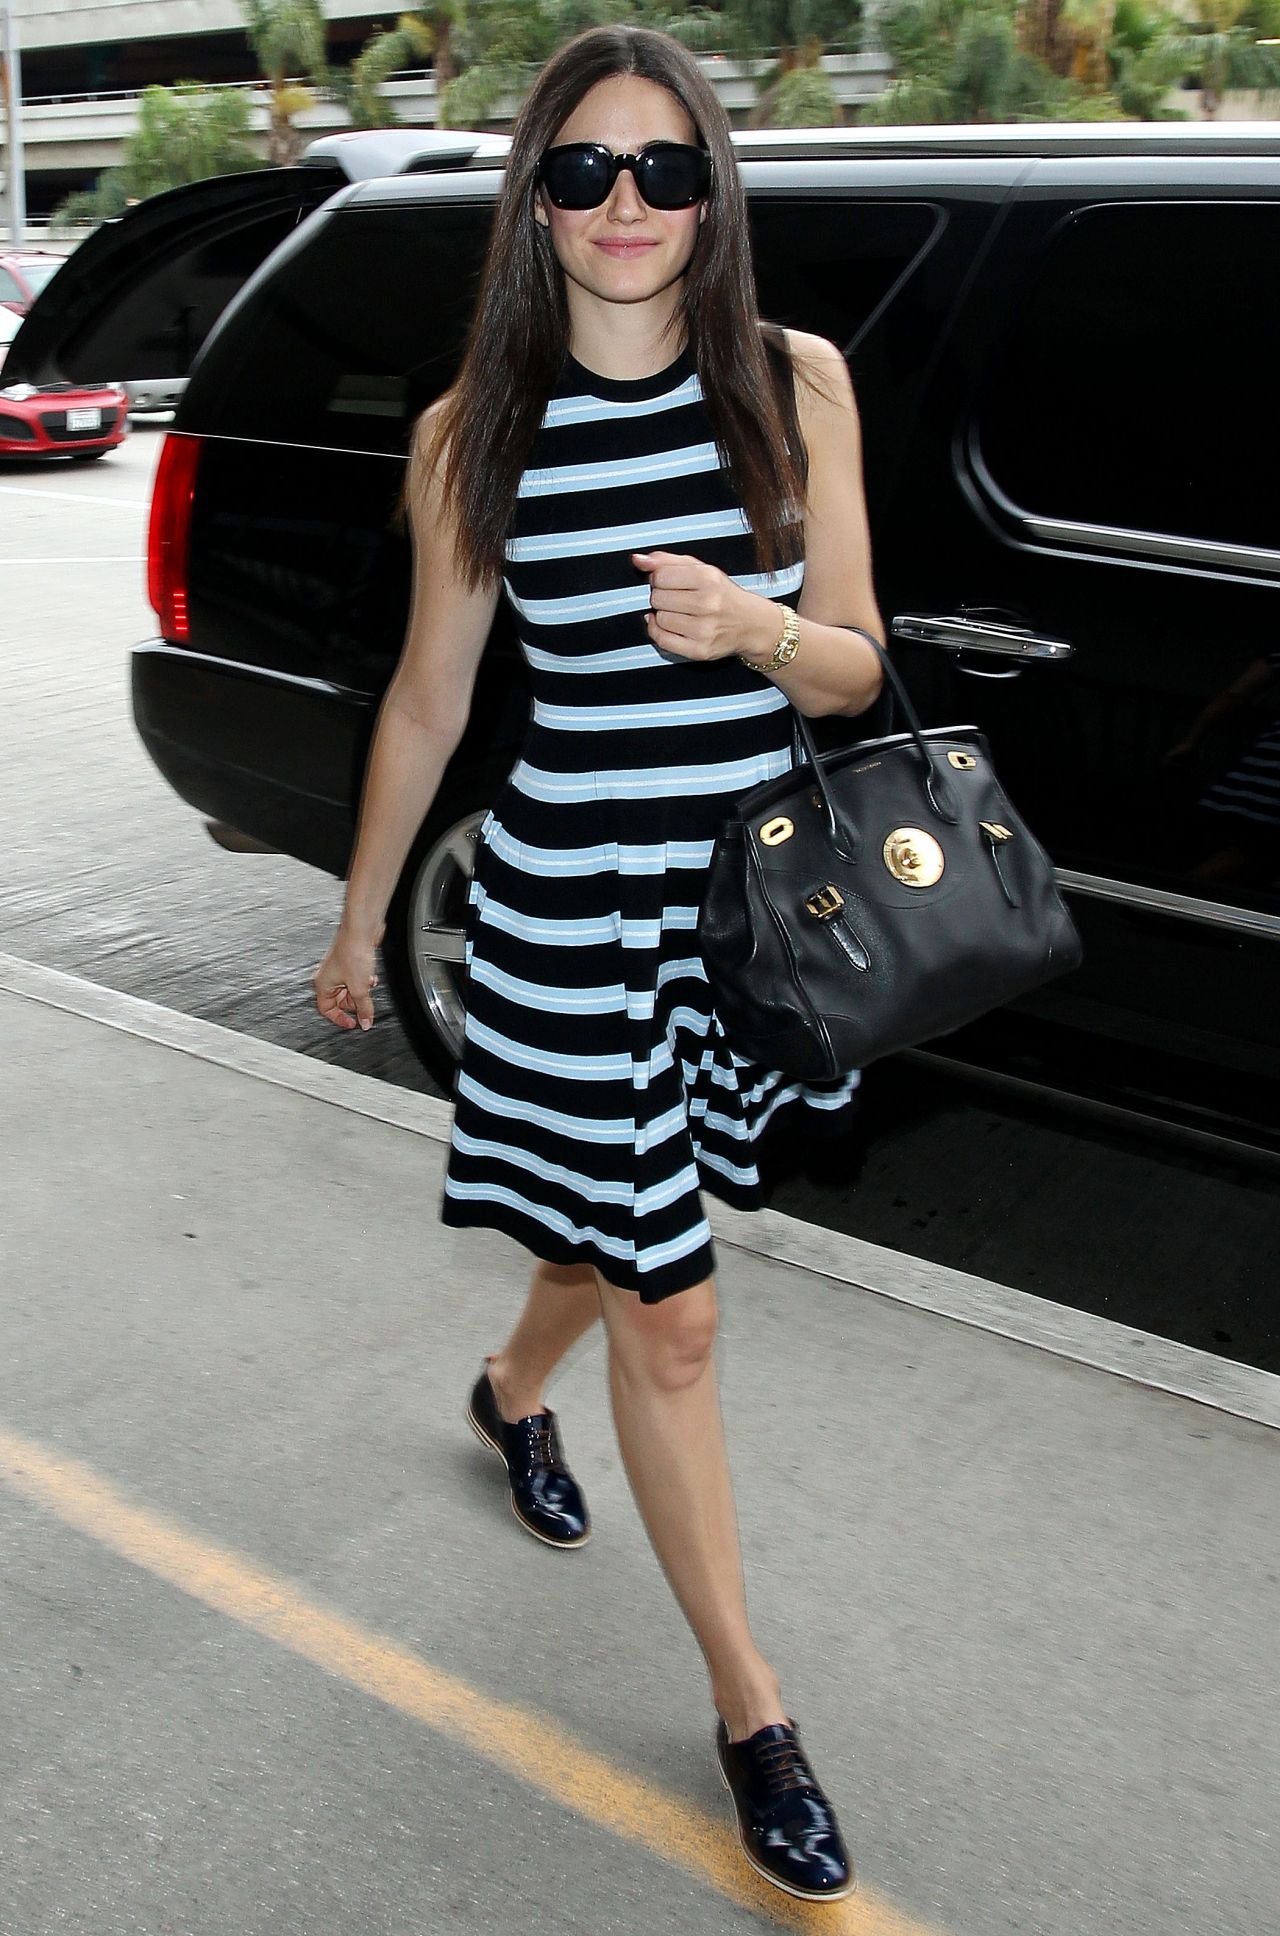 Emmy Rossum in Striped Dress at LAX Airport in Los Angeles - September ...